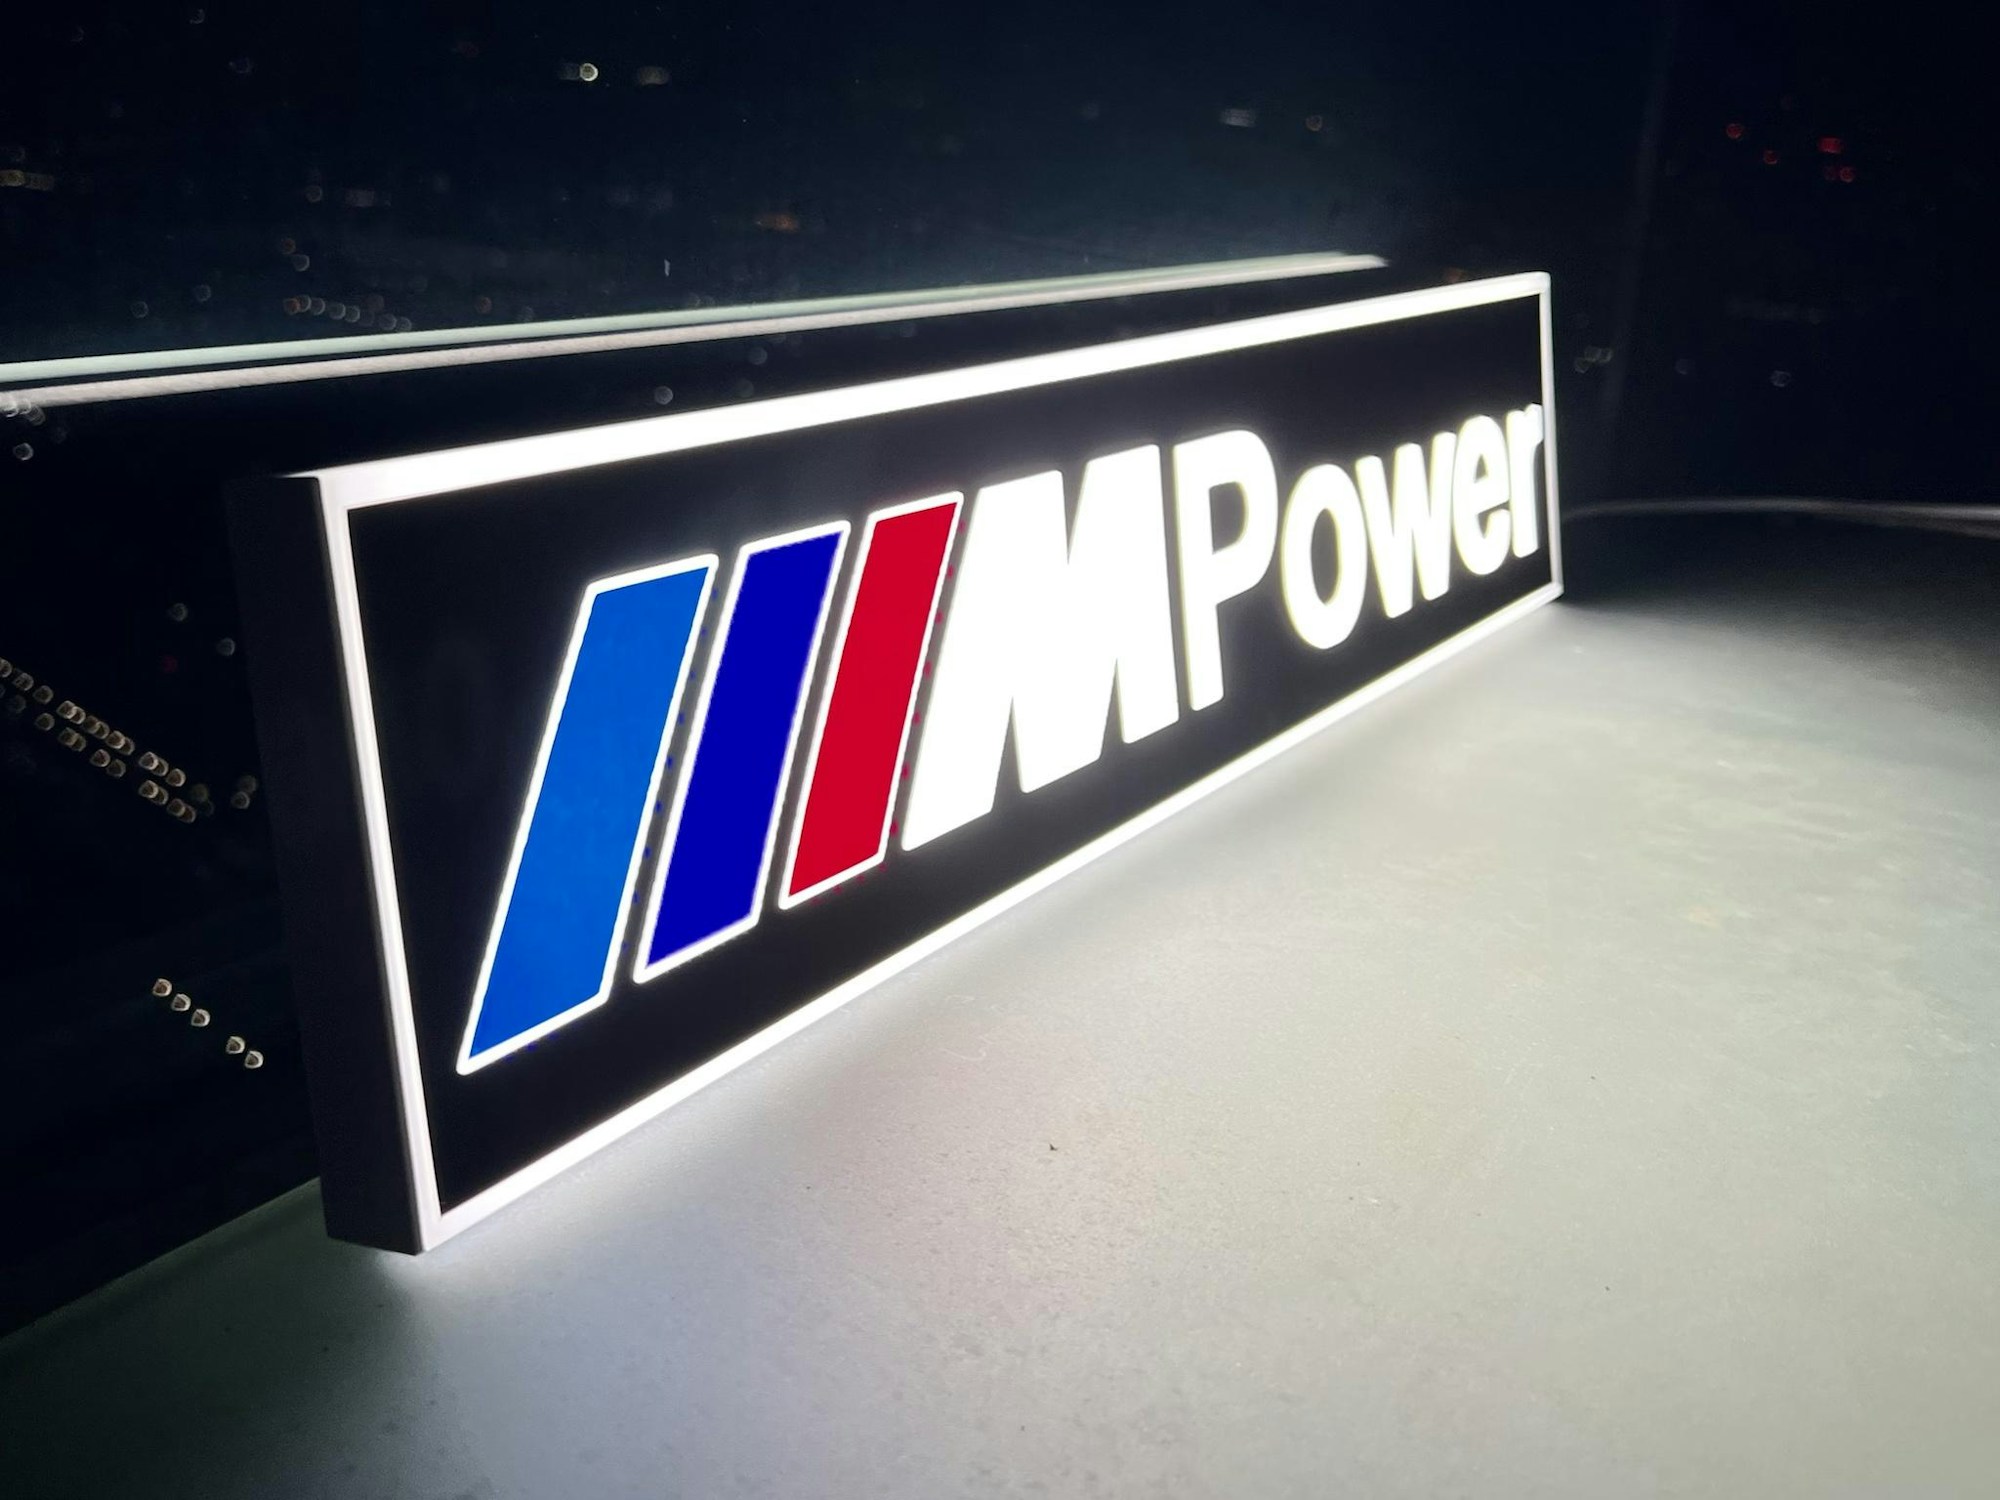 BMW M POWER ILLUMINATED SIGN for sale by auction in London, United